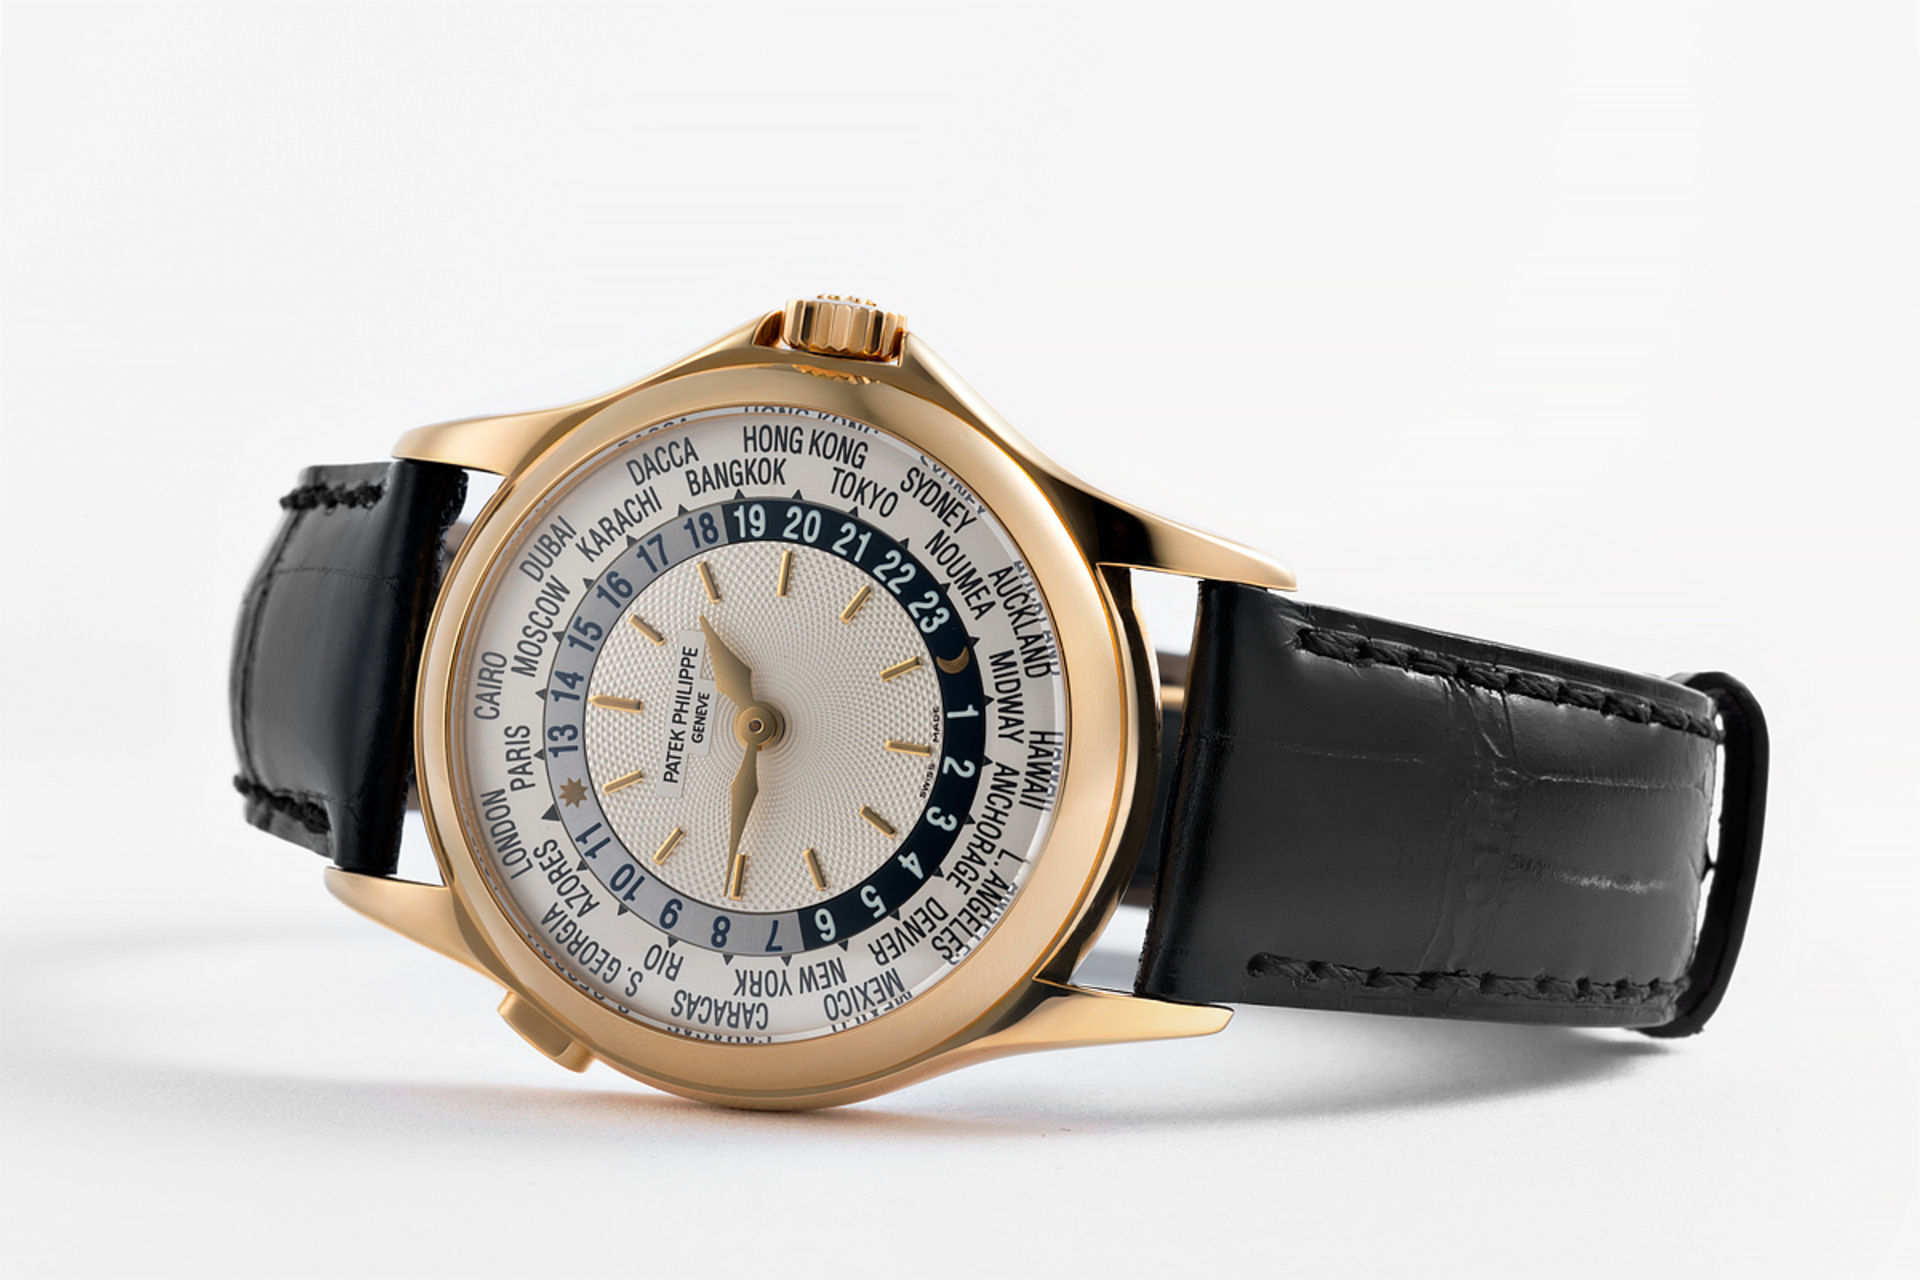 ref 5110J-001 | Yellow Gold 'Complete Set' | Patek Philippe World Time